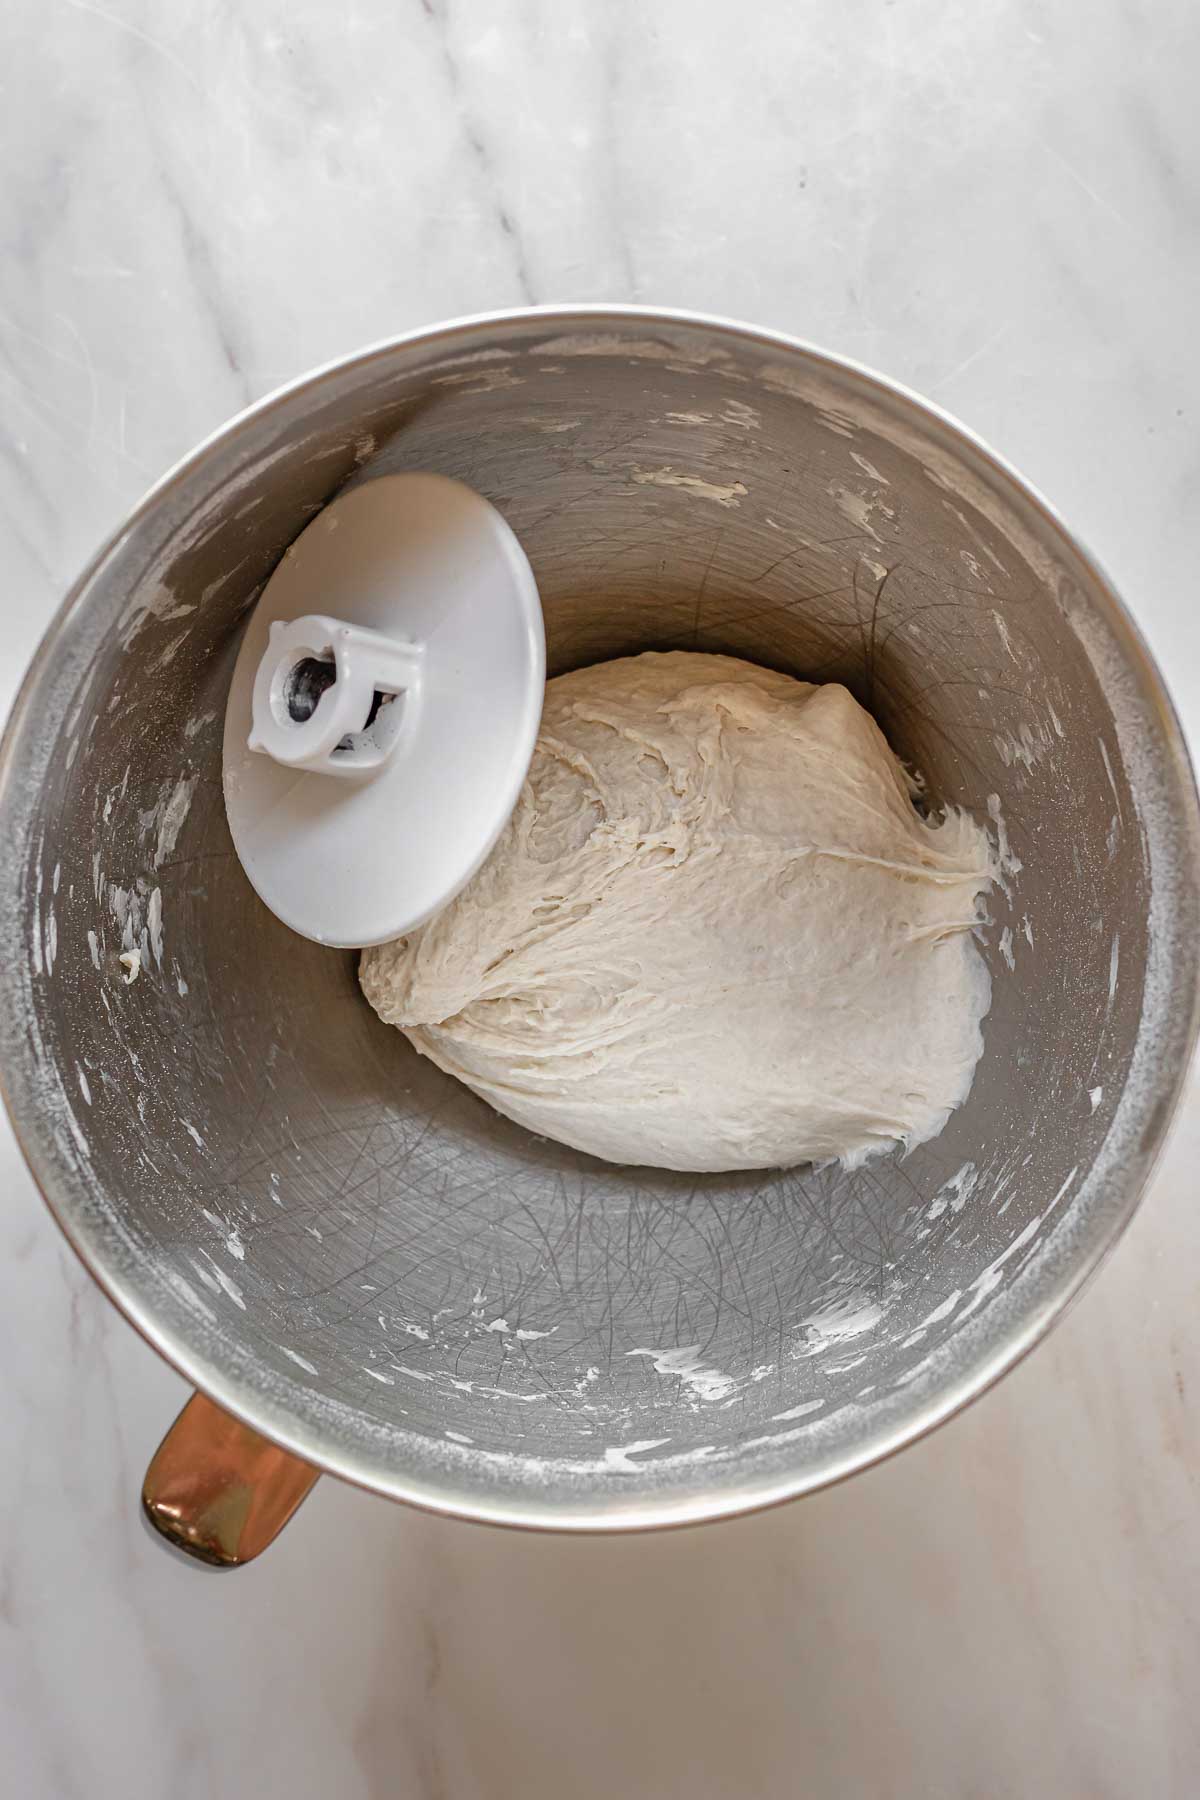 Pizza dough in the bowl of a stand mixer ready to rise.